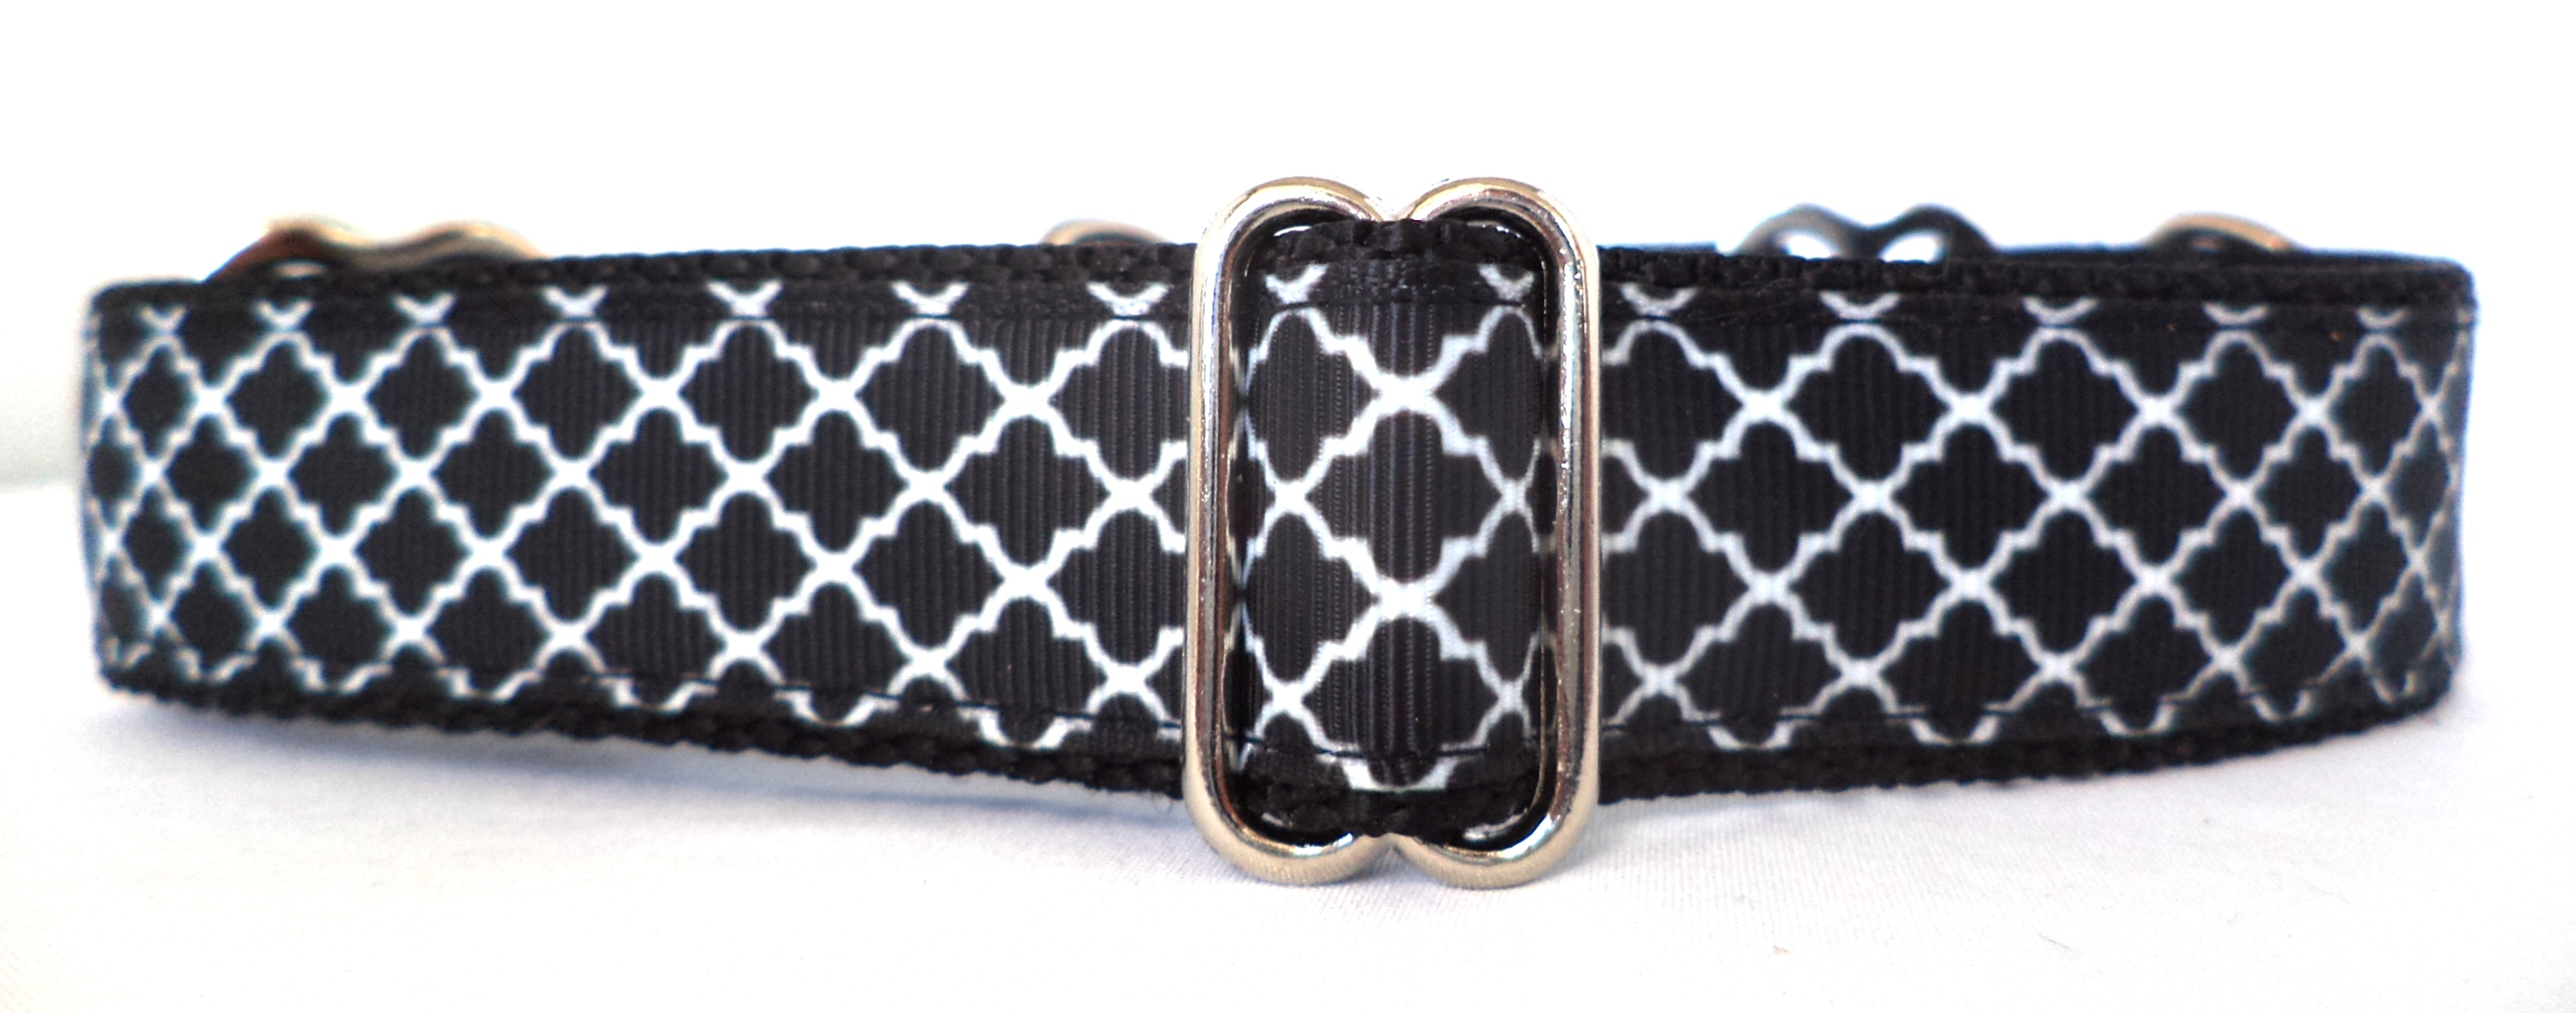 1 inch Martingale - Classic Black and White